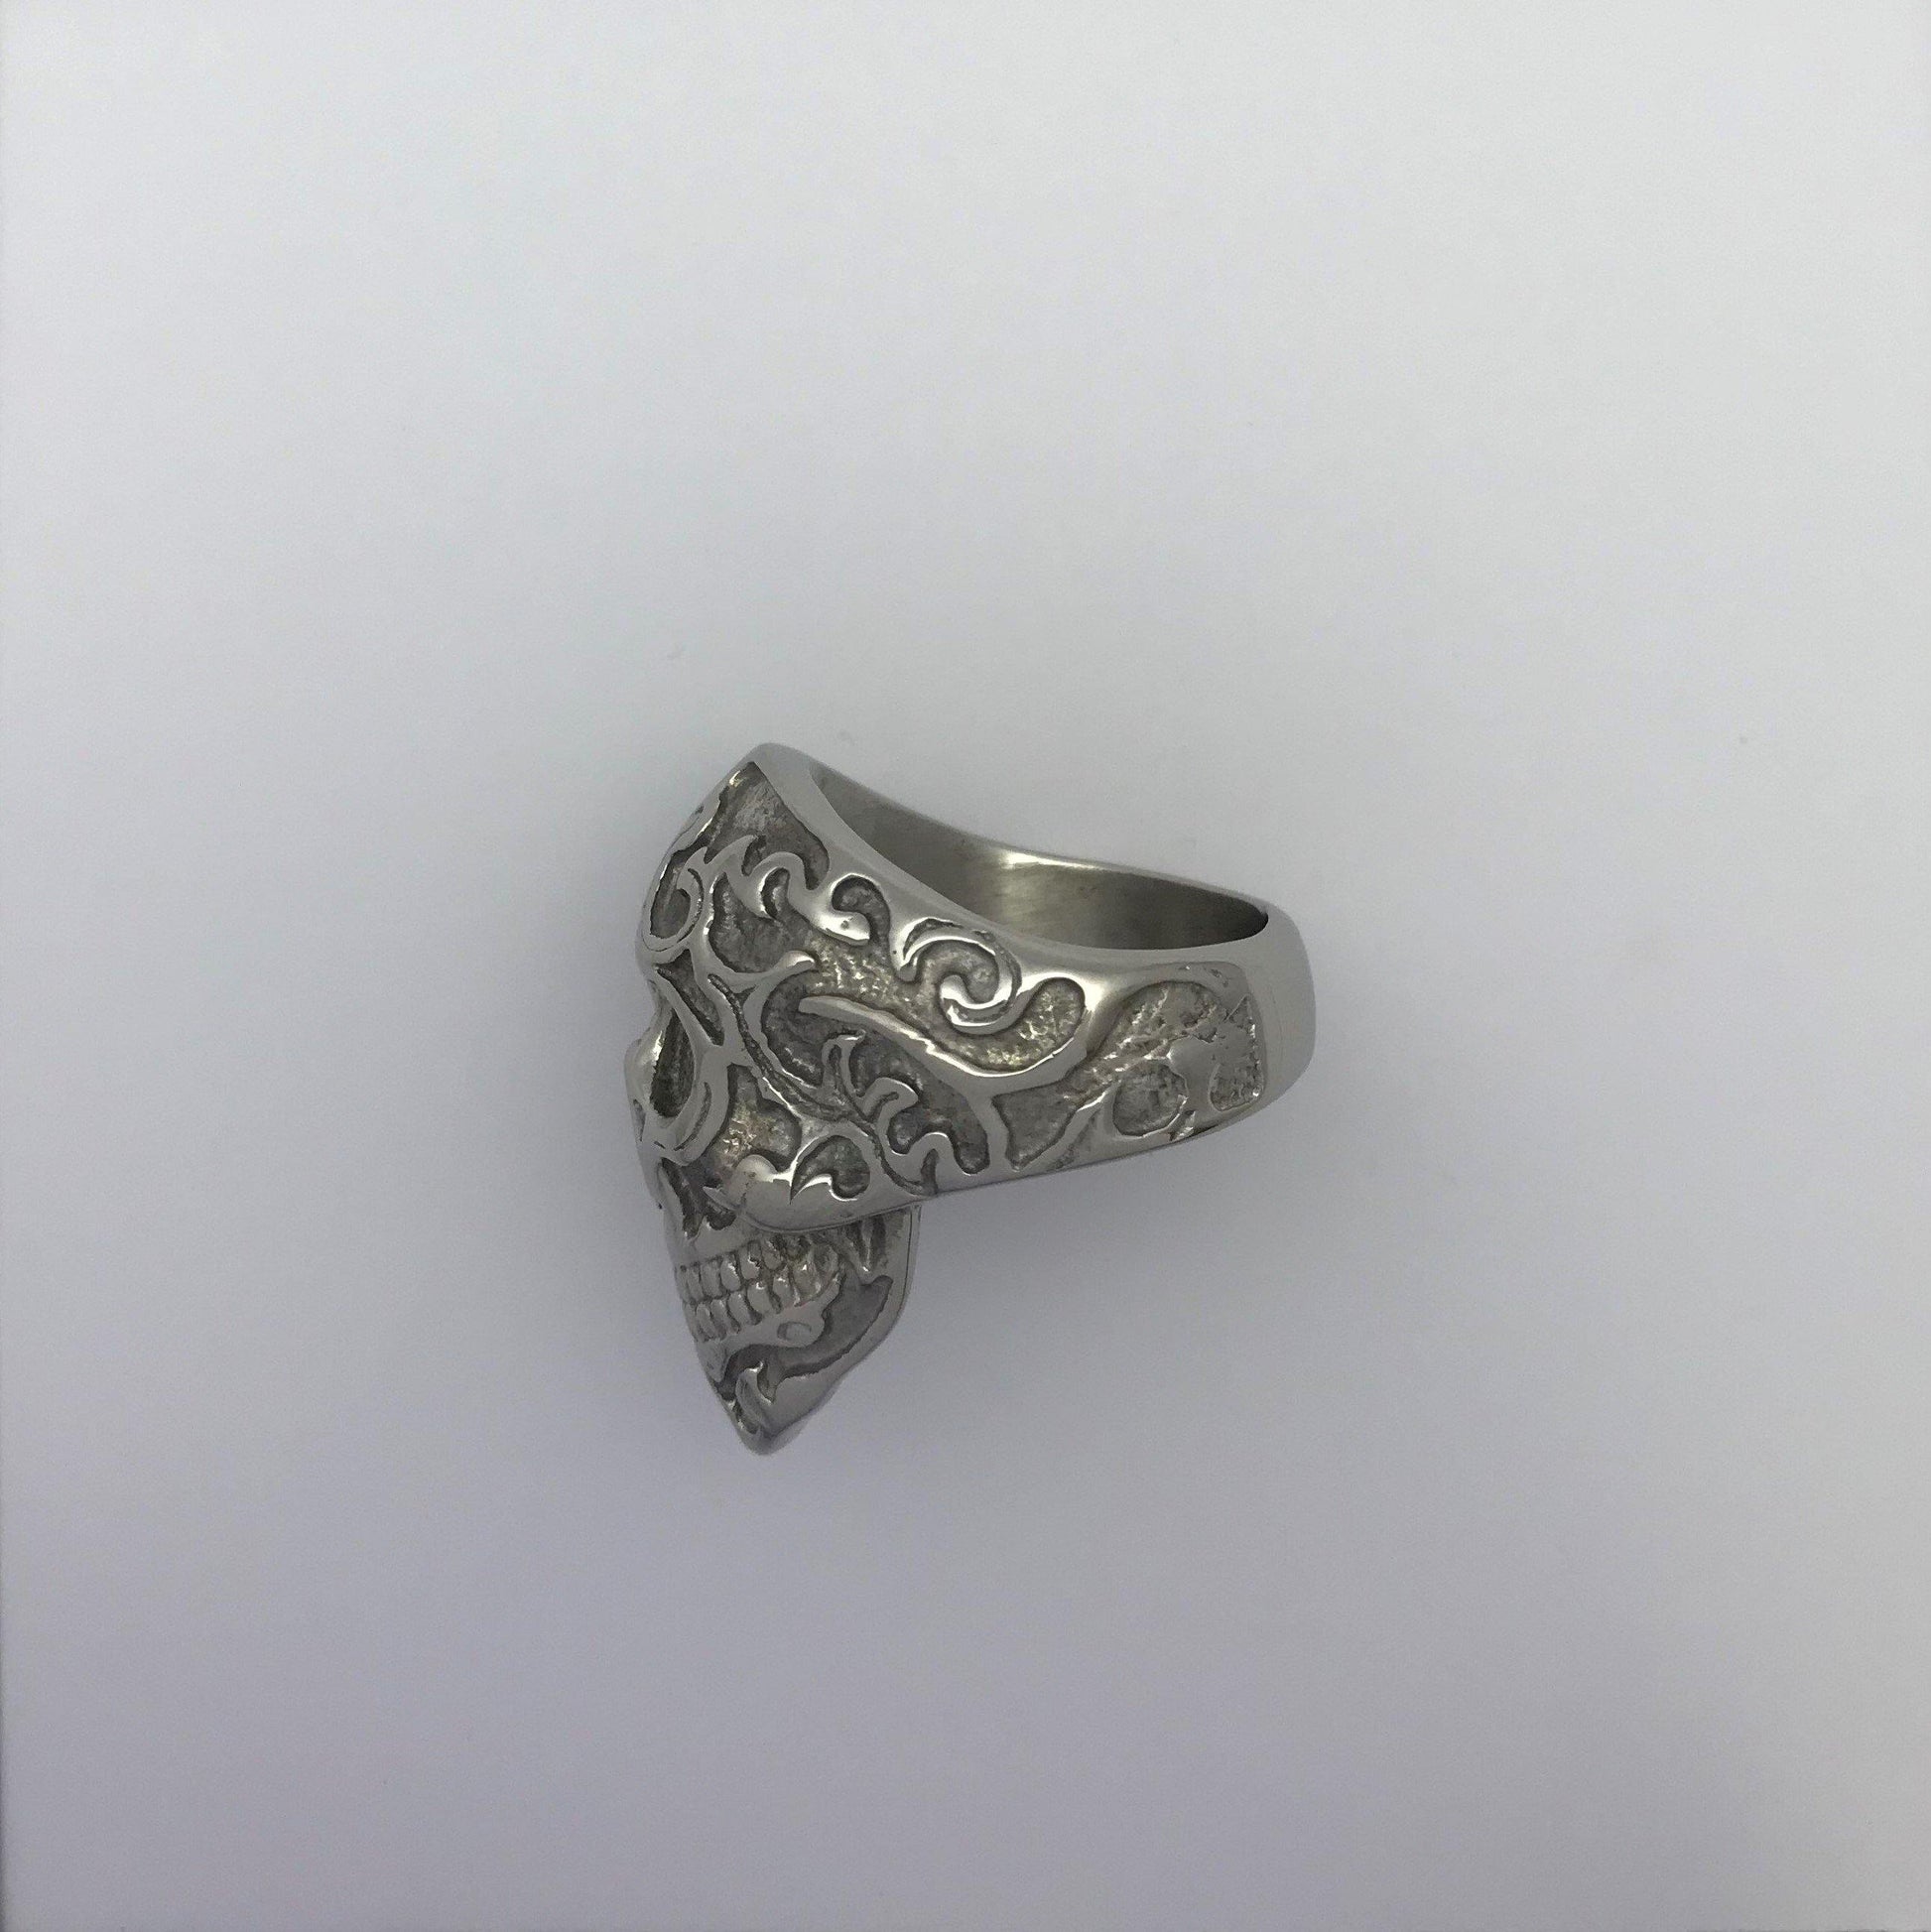 Clarity Skull Ring - Big Dog Steel Surgical Stainless Steel